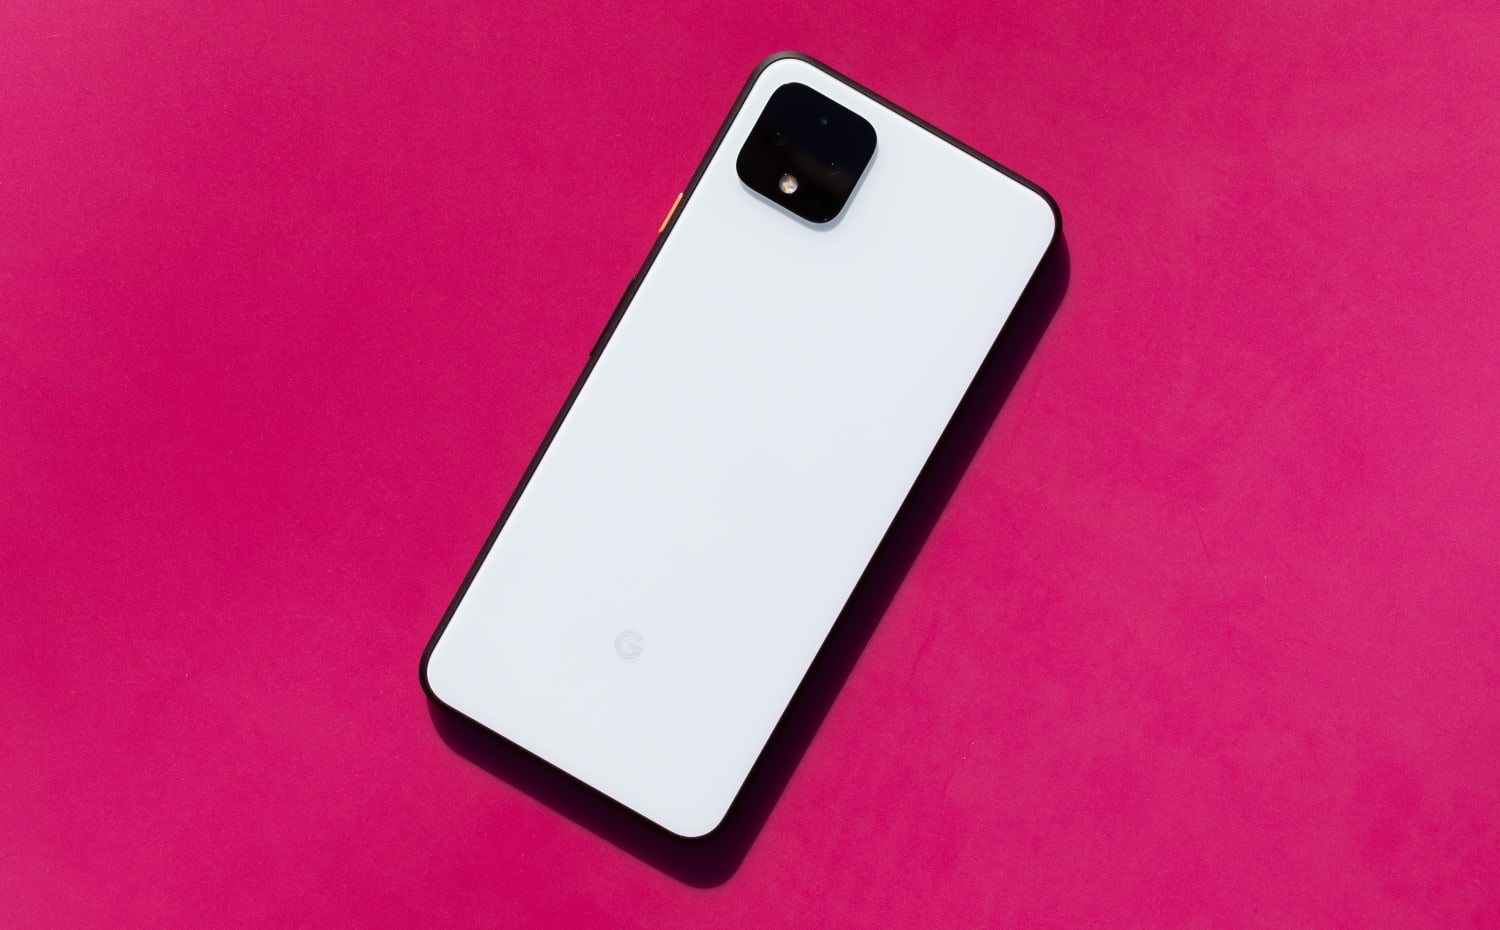 Google Pixel 4A and 4A XL rumors are heating up. Here's everything we've heard